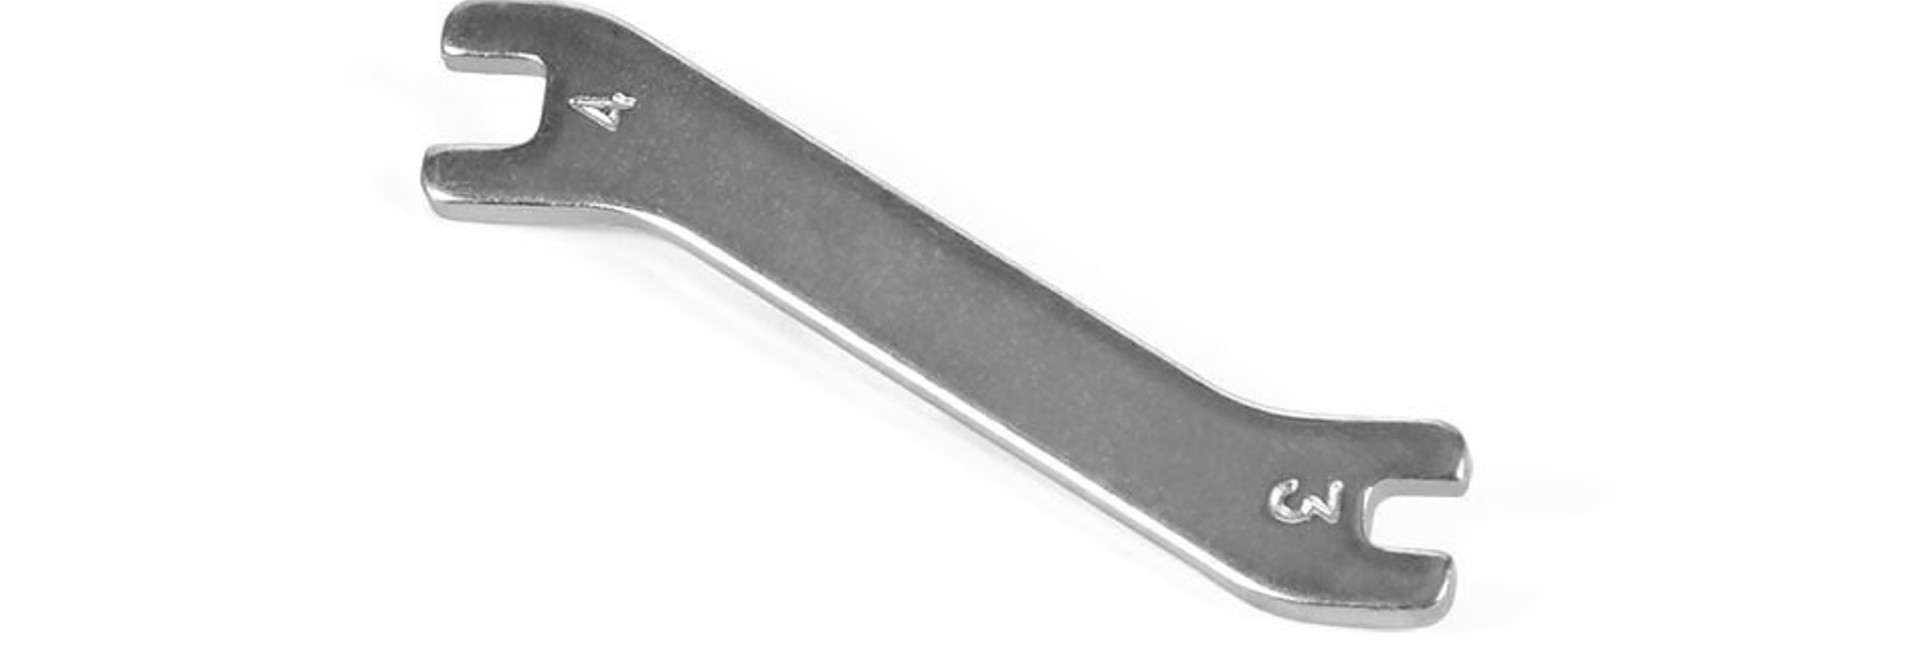 HUDY TURNBUCKLE WRENCH 3 & 4MM. #H181091